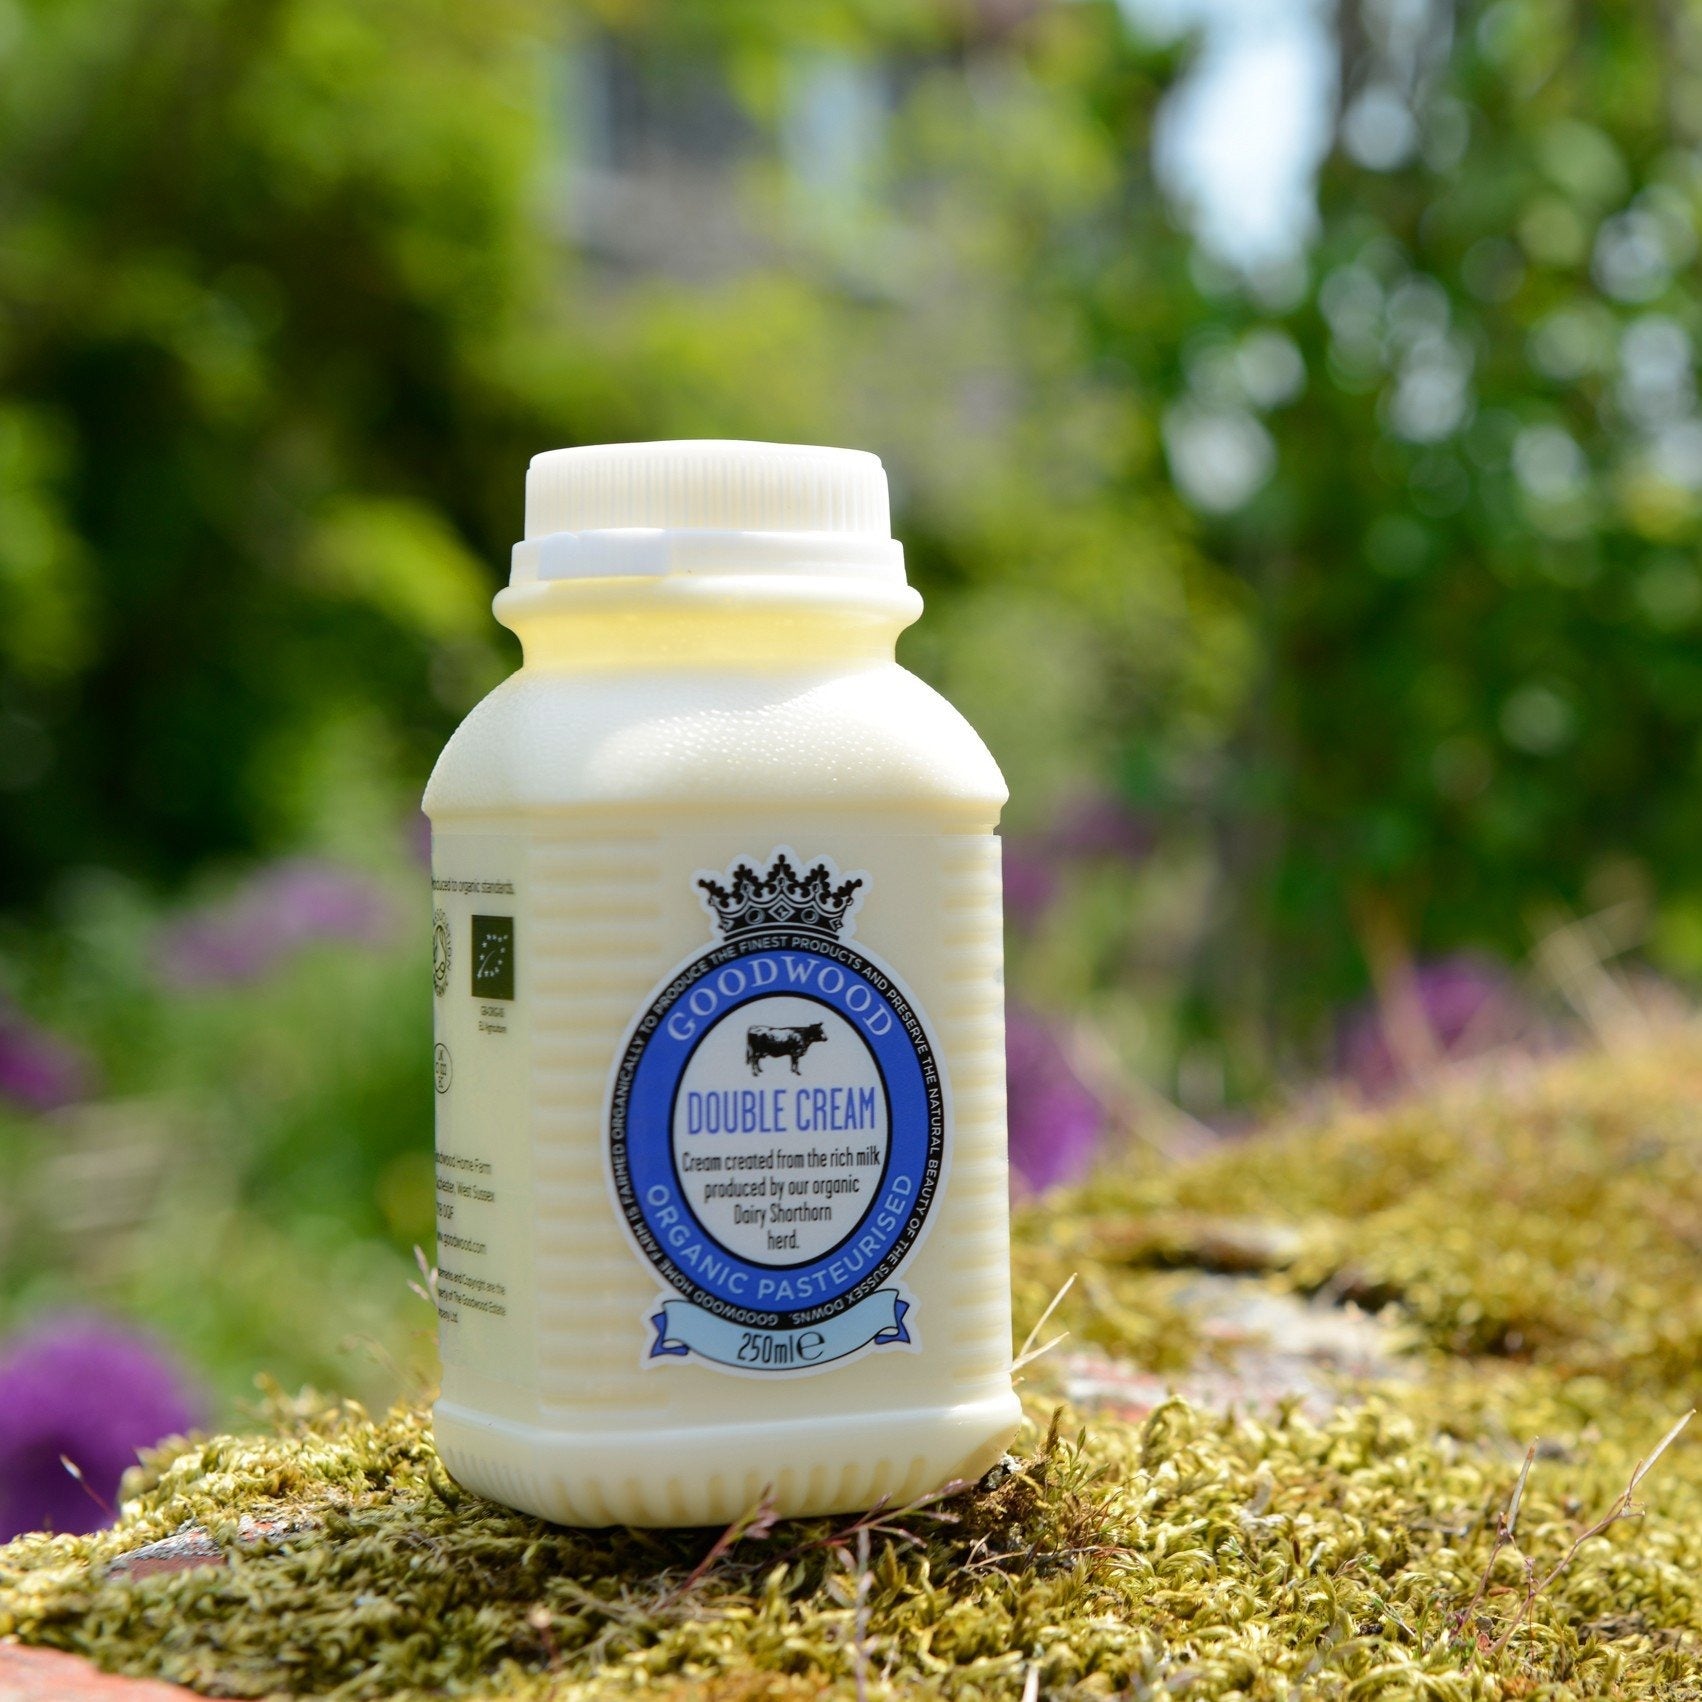 A bottle of 250ml Goodwood Organic Double Cream outside at the Goodwood Farm Shop.